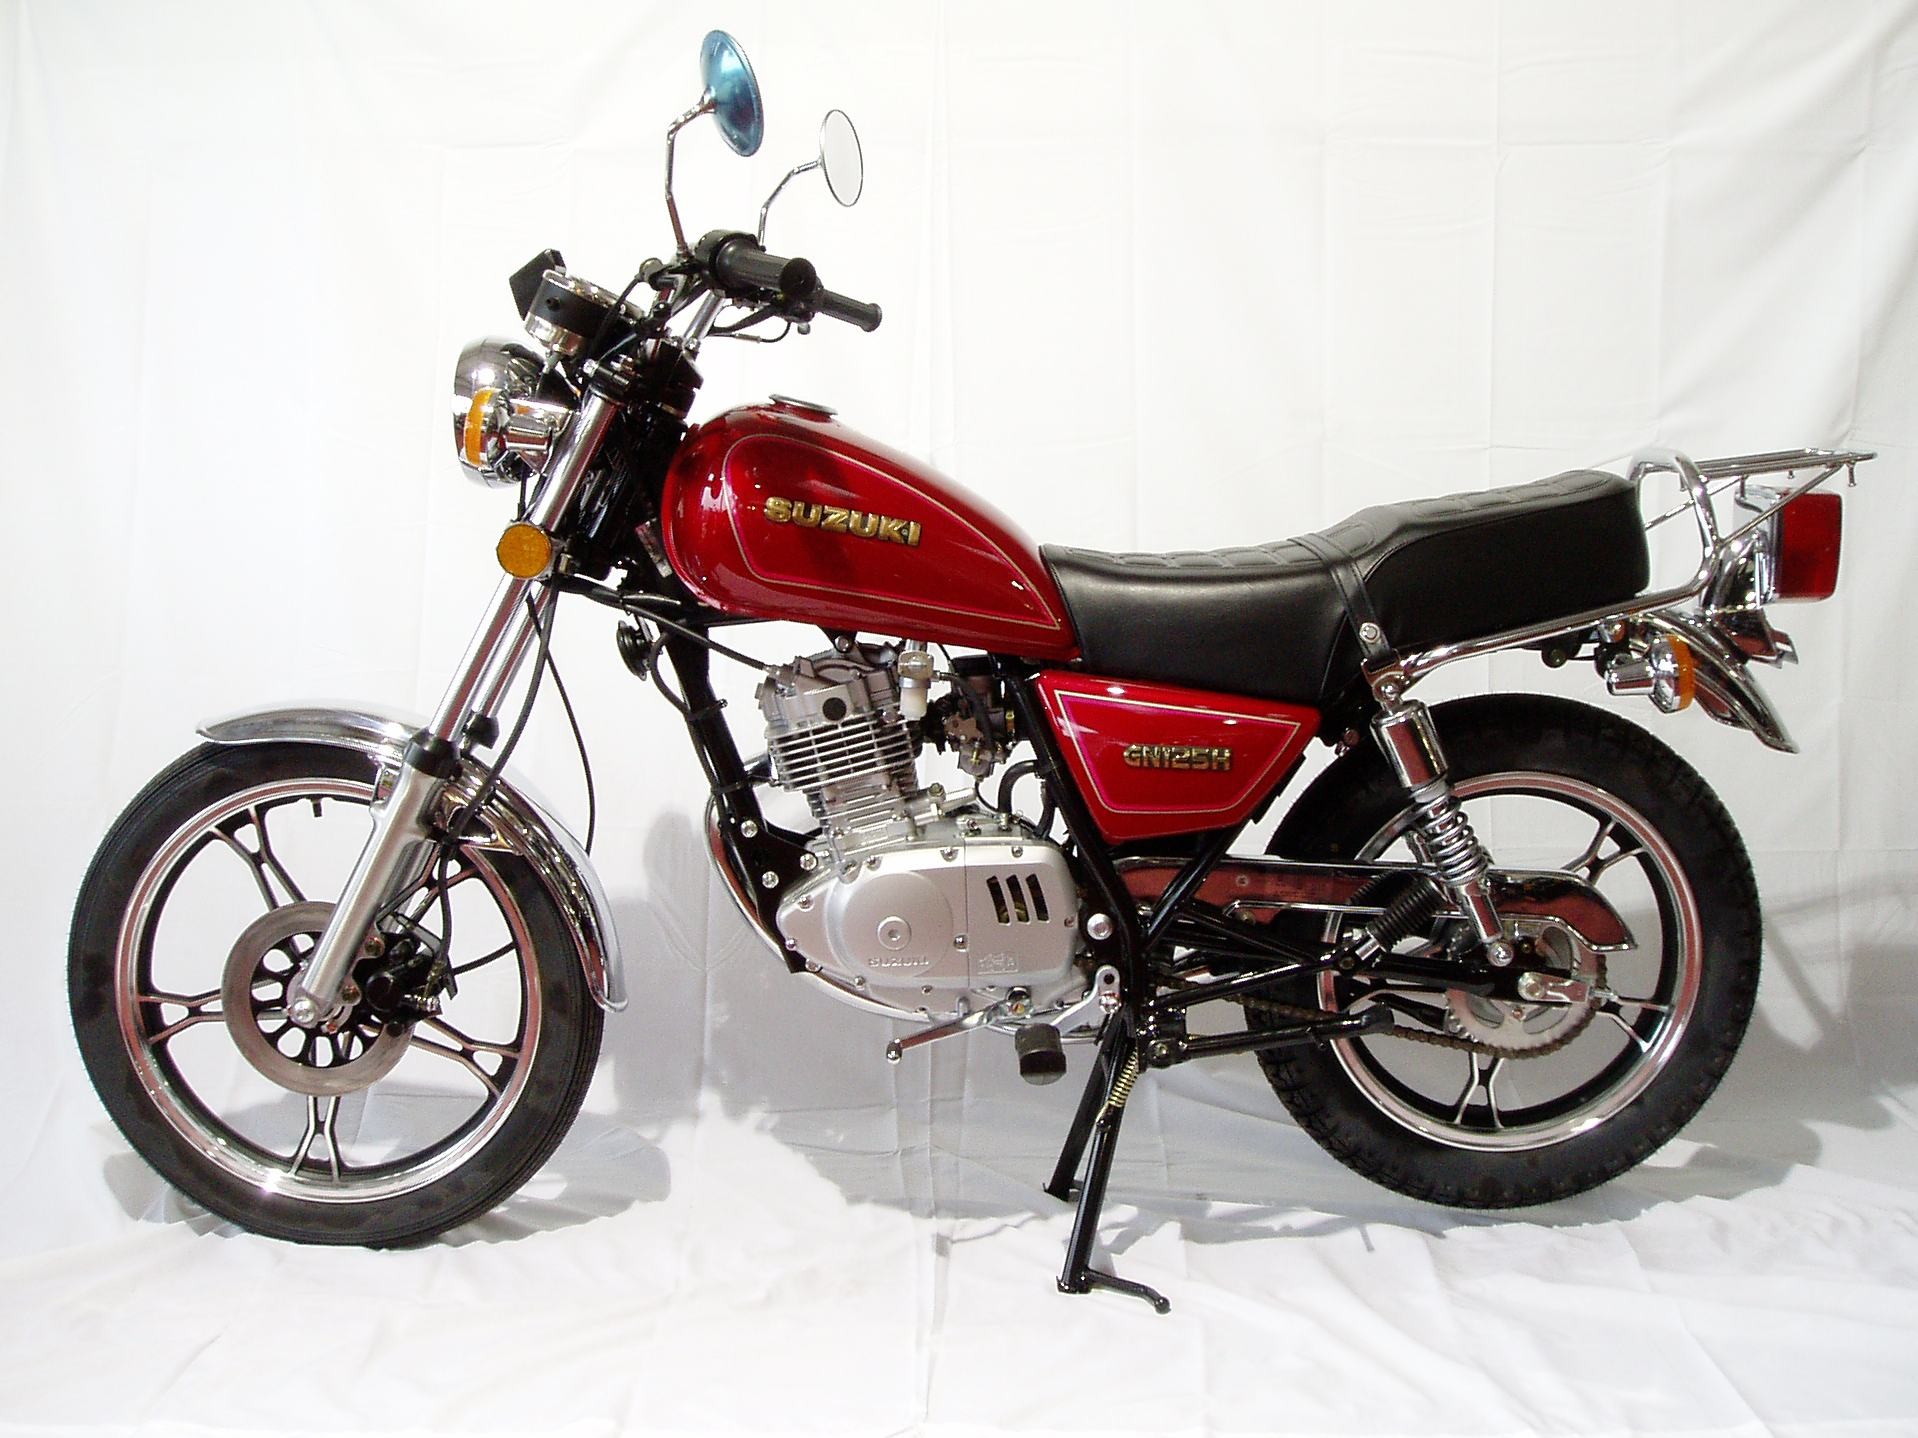 suzuki-gn-125-review-and-photos